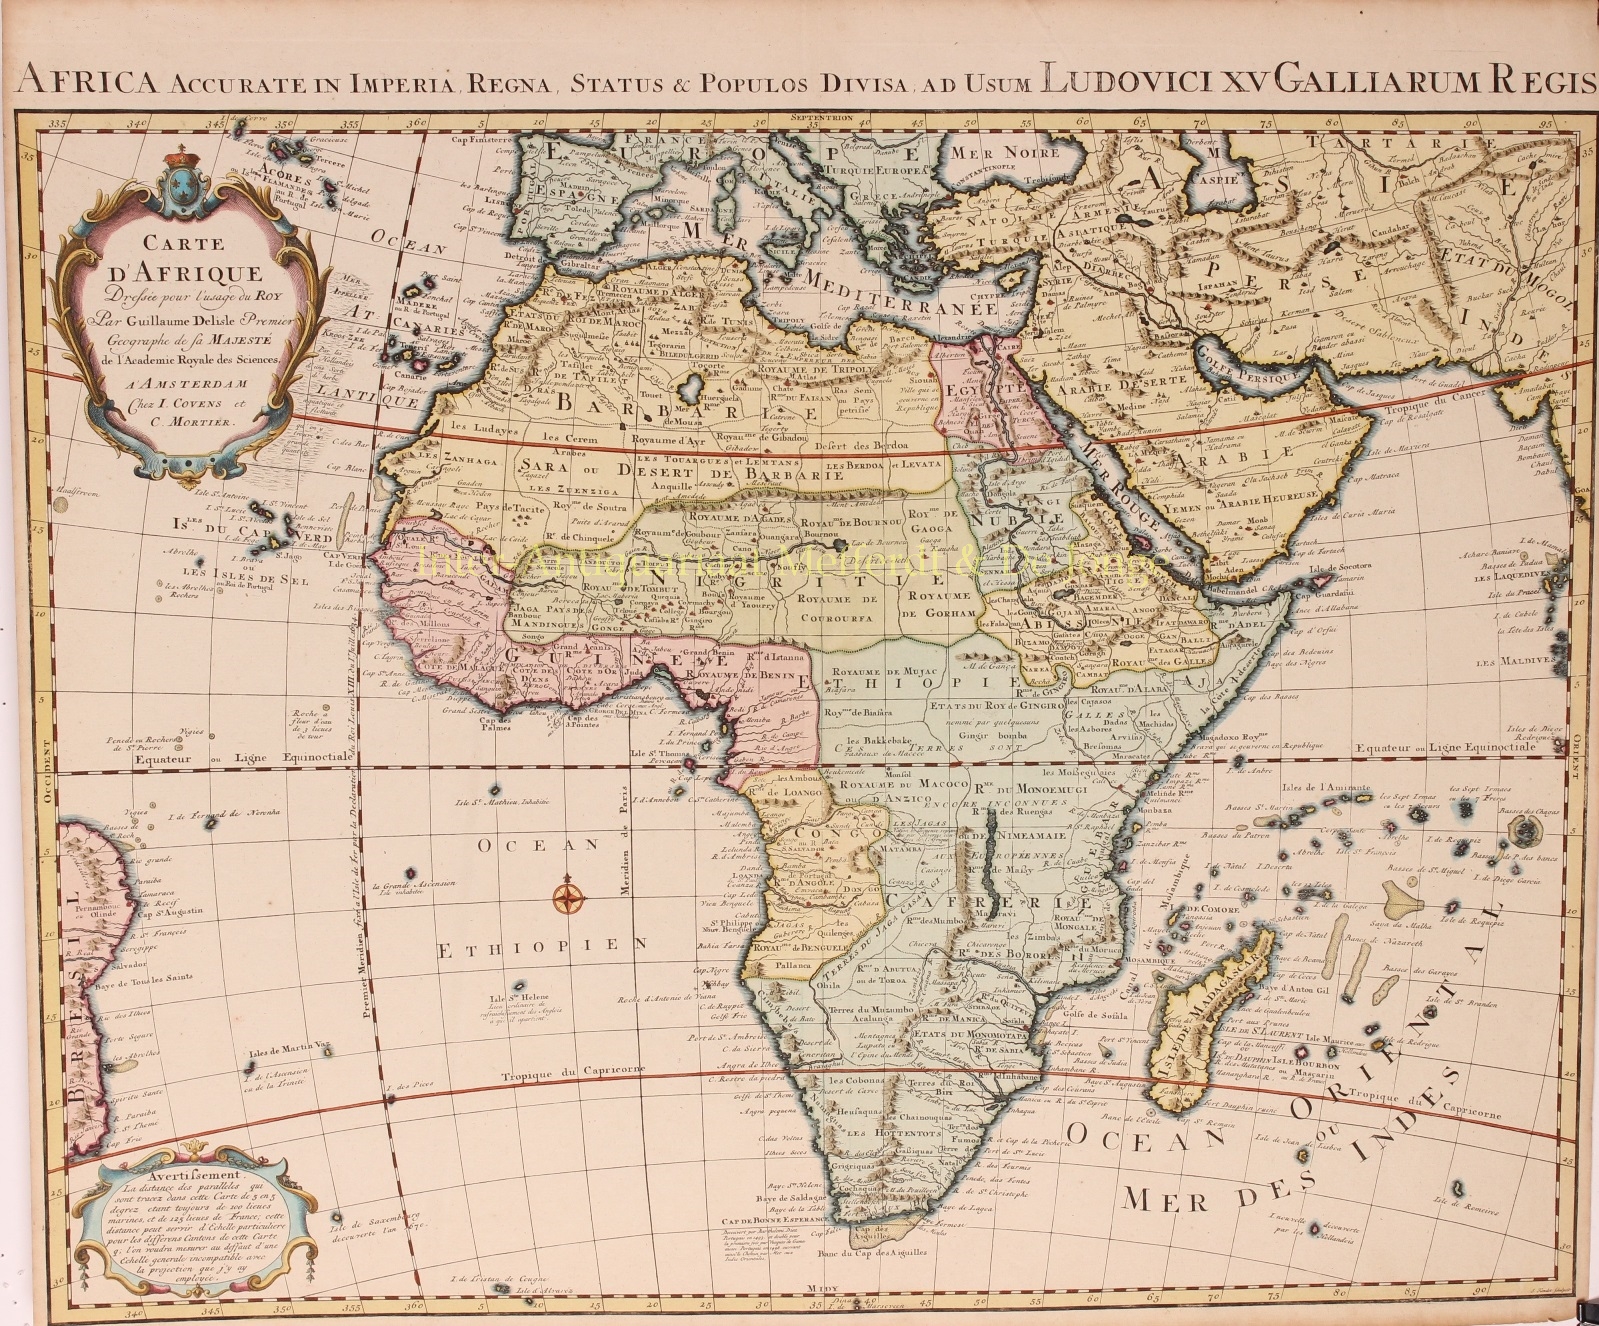 Covens & Mortier - Africa - Guillaume de LIsle, Covens and Mortier, 1724